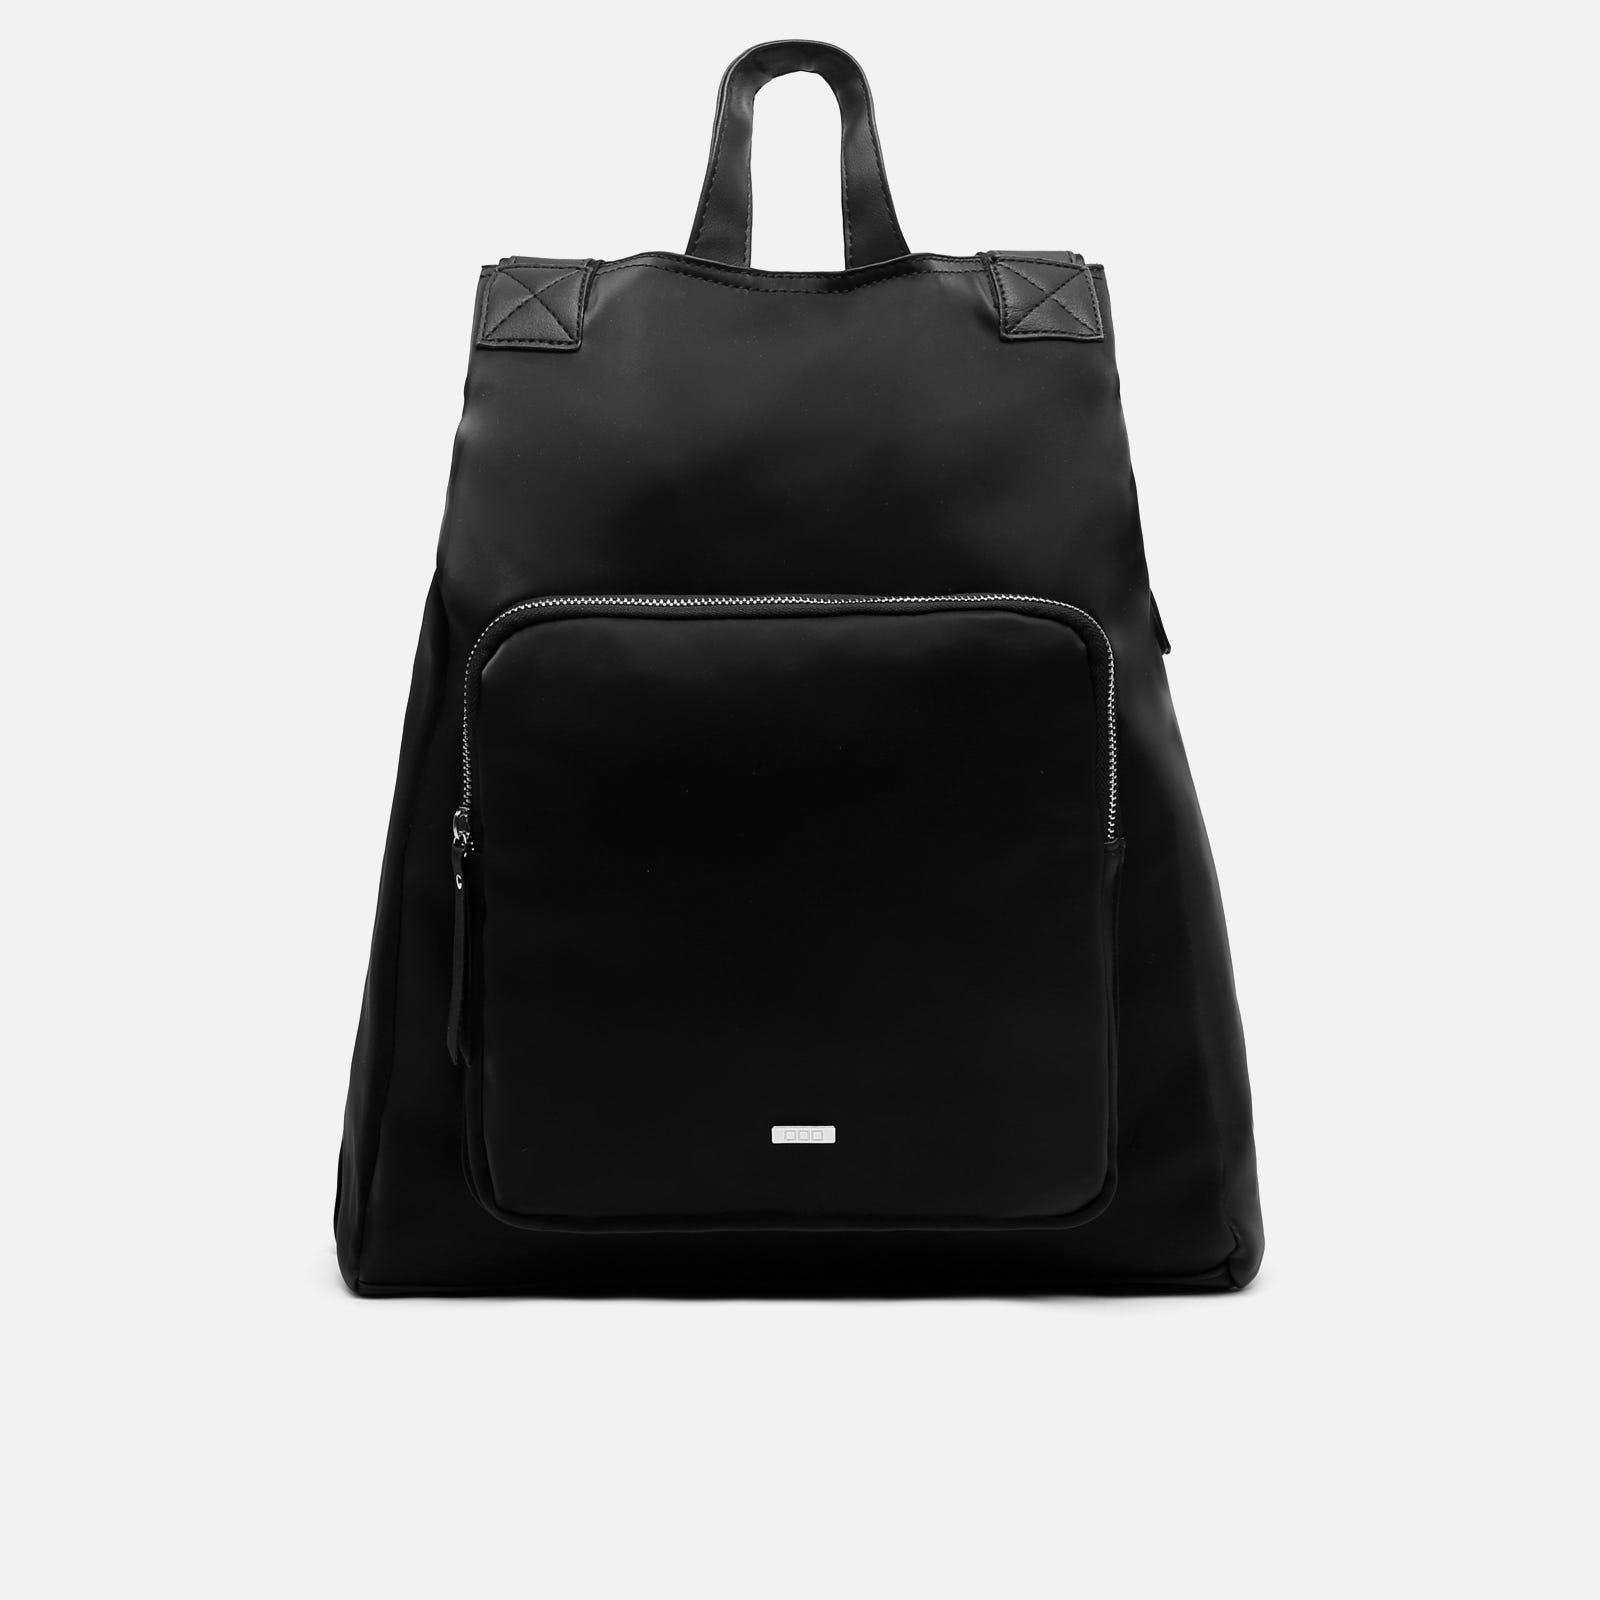 Taby nylon anti-theft backpack